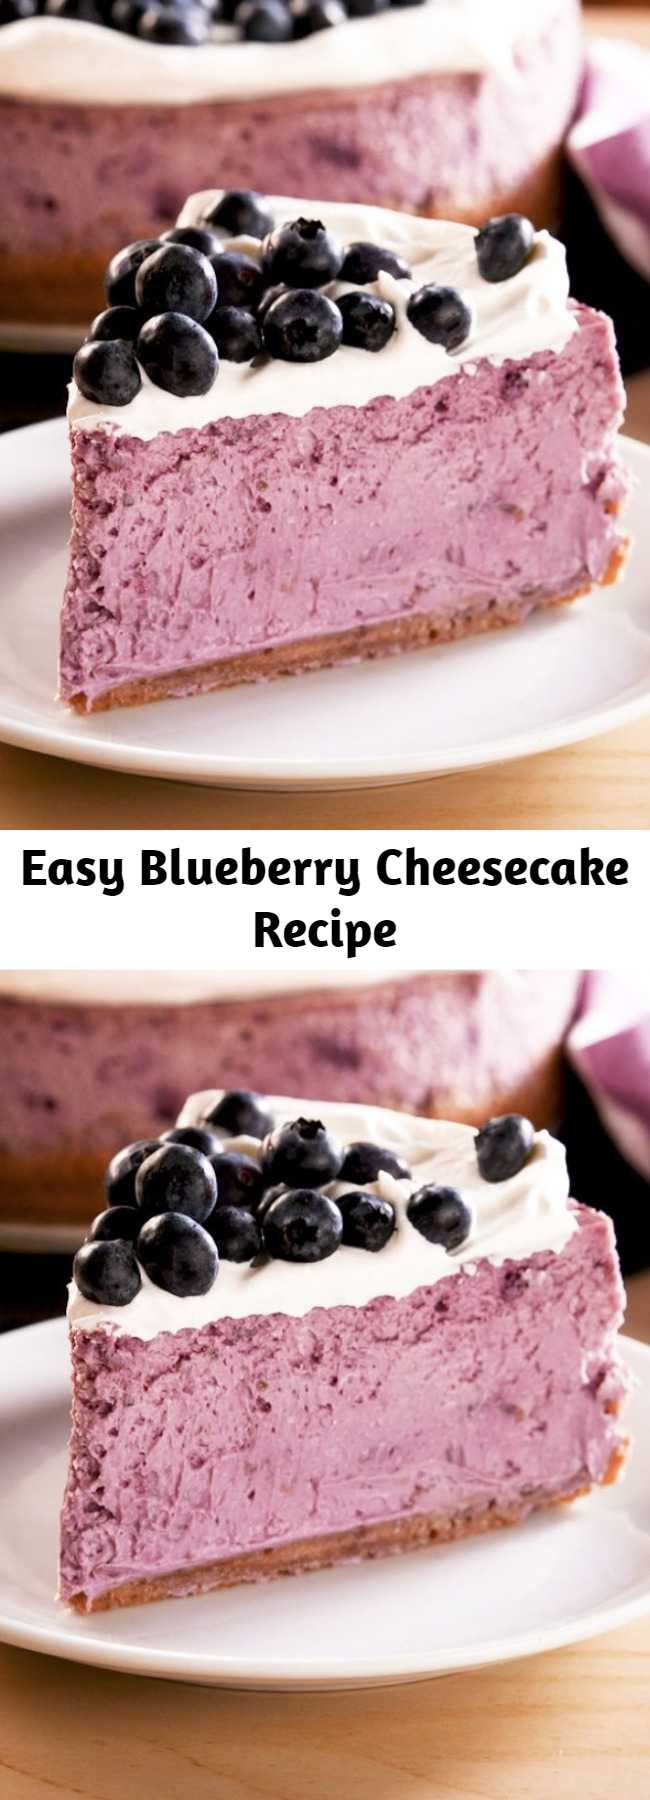 Easy Blueberry Cheesecake Recipe - Swirling blueberry puree into cheesecake batter isn't only beautiful, it's extremely delicious. 